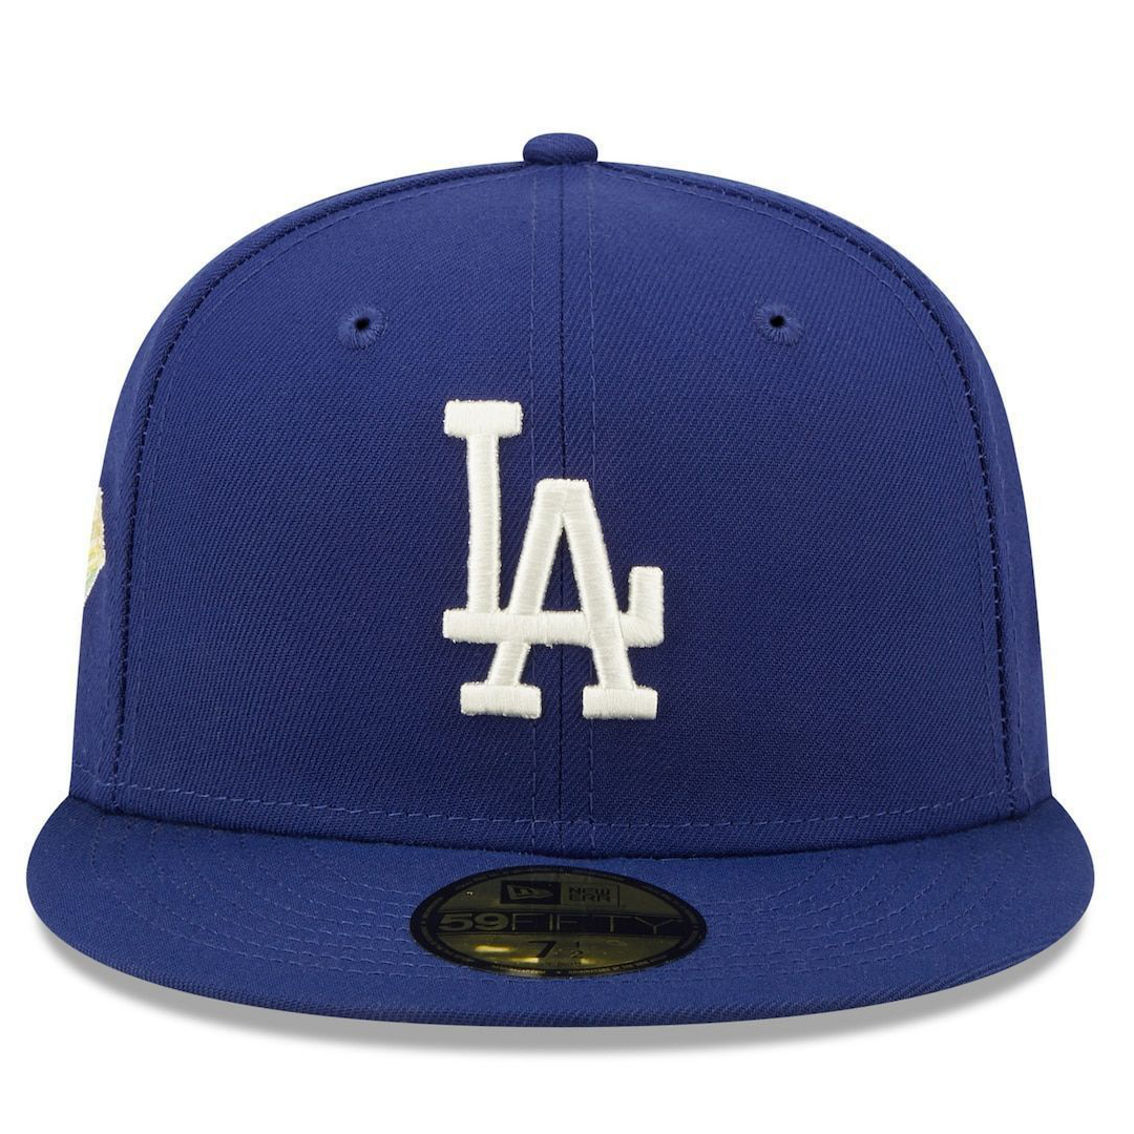 New Era Men's Royal Los Angeles Dodgers 1988 World Series s Citrus Pop UV 59FIFTY Fitted Hat - Image 3 of 4